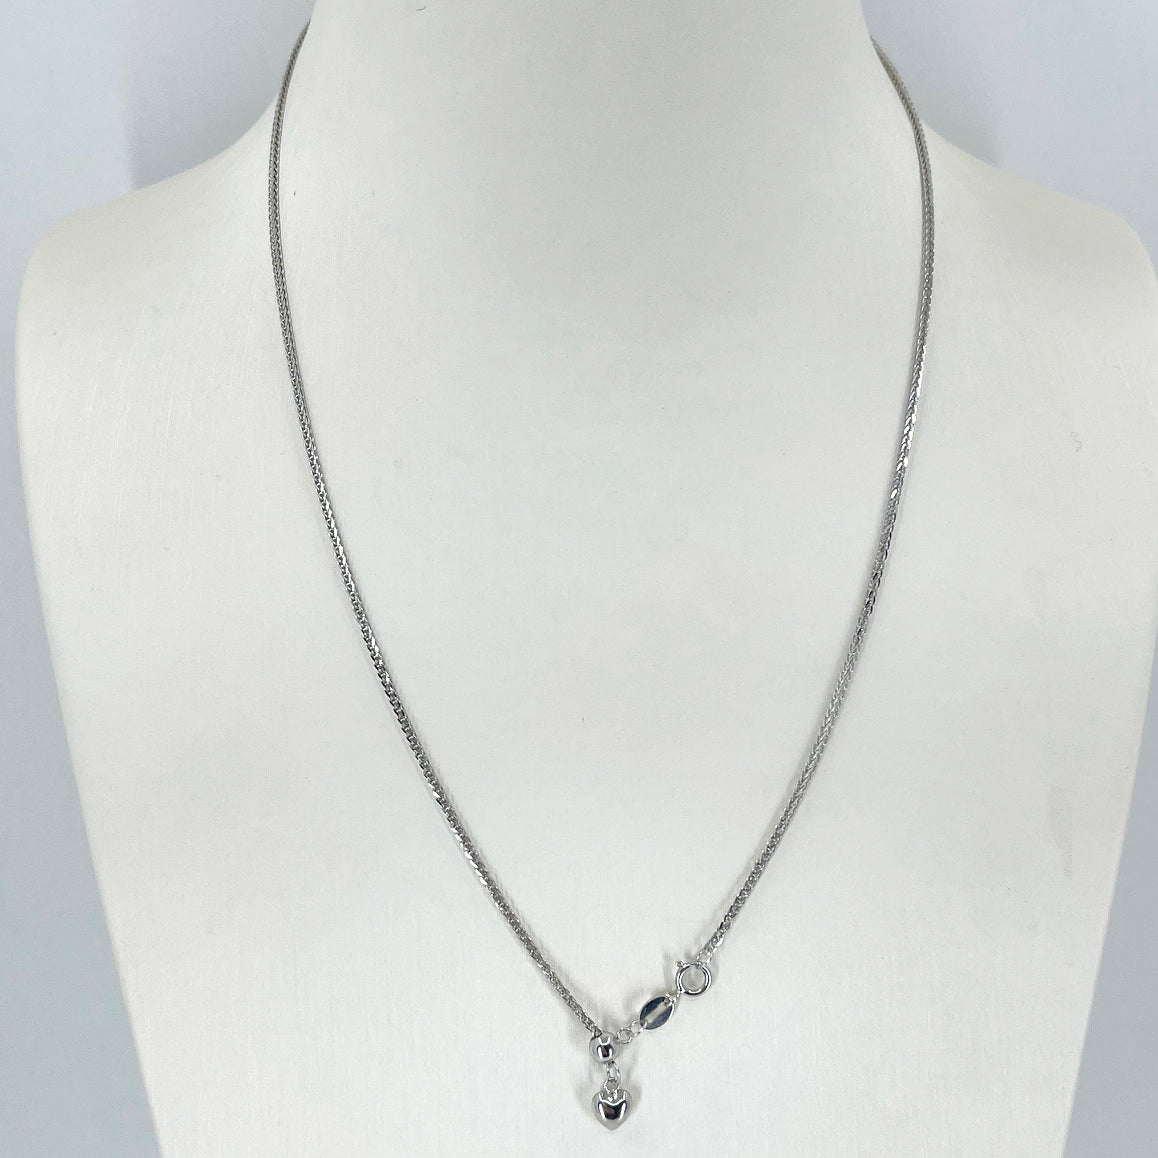 18K Solid White Gold Adjustable Link Chain Maximum 18" 3.6 Grams